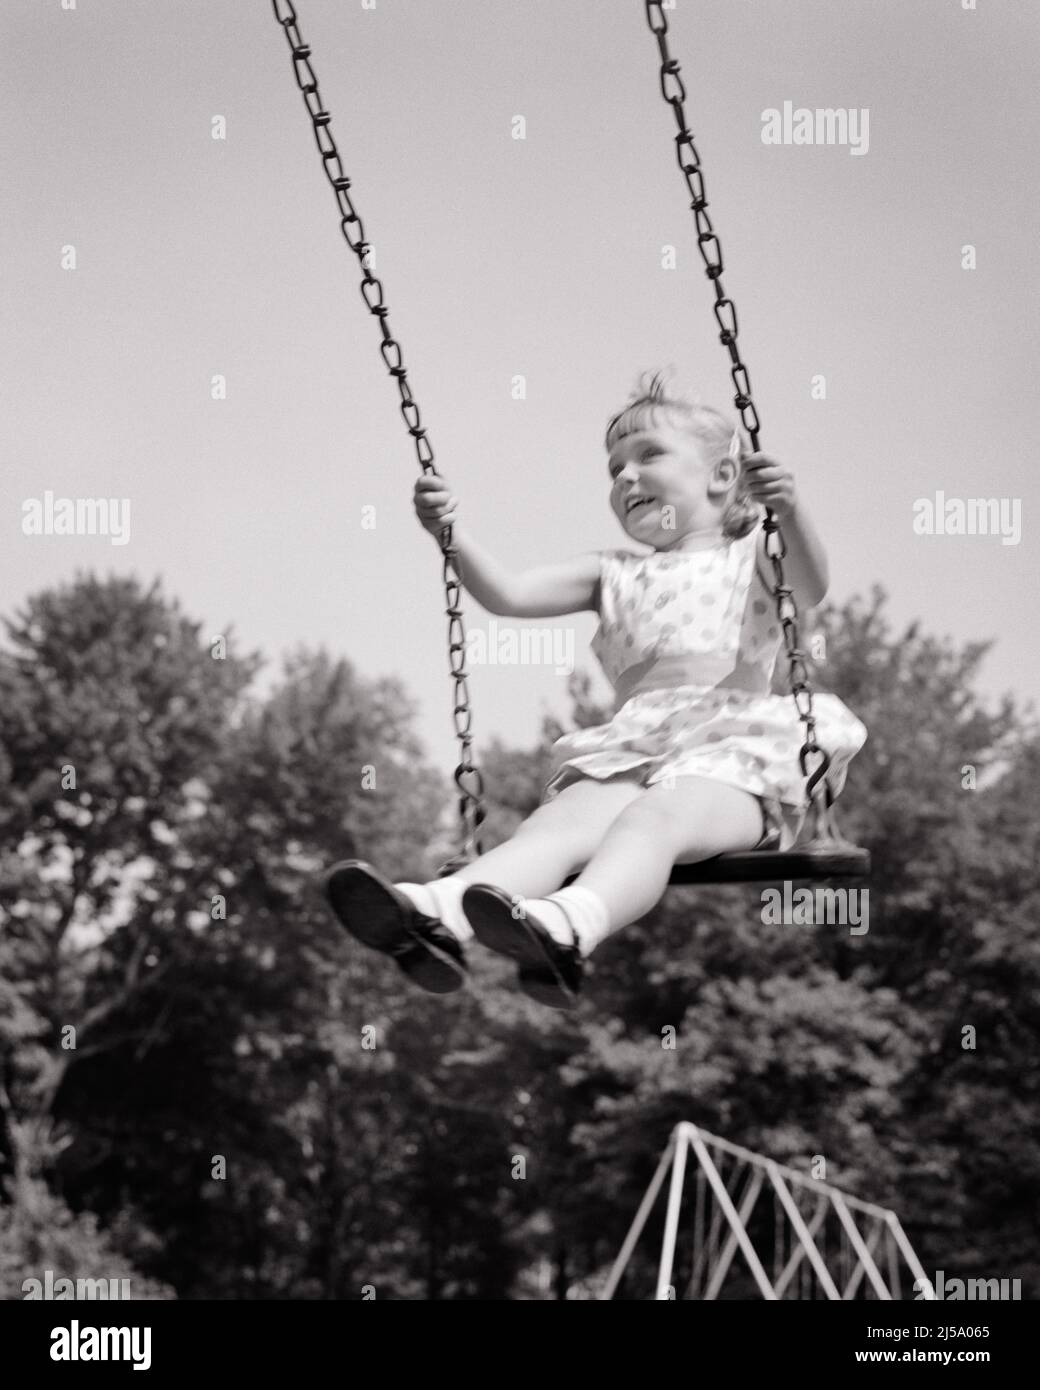 1950s EXCITED SMILING LITTLE GIRL FLYING HIGH ON A PLAYGROUND SWING SET - j7588 HAR001 HARS LIFESTYLE SATISFACTION FEMALES HEALTHINESS HOME LIFE COPY SPACE FULL-LENGTH CONFIDENCE EXPRESSIONS B&W SUMMERTIME FREEDOM DREAMS HUMOROUS HAPPINESS CHEERFUL ADVENTURE LEISURE EXCITEMENT LOW ANGLE COMICAL DIRECTION MARY JANE SMILES SWINGING COMEDY JOYFUL GROWTH HIGH FLYING JUVENILES RELAXATION SEASON BLACK AND WHITE CAUCASIAN ETHNICITY HAR001 OLD FASHIONED Stock Photo